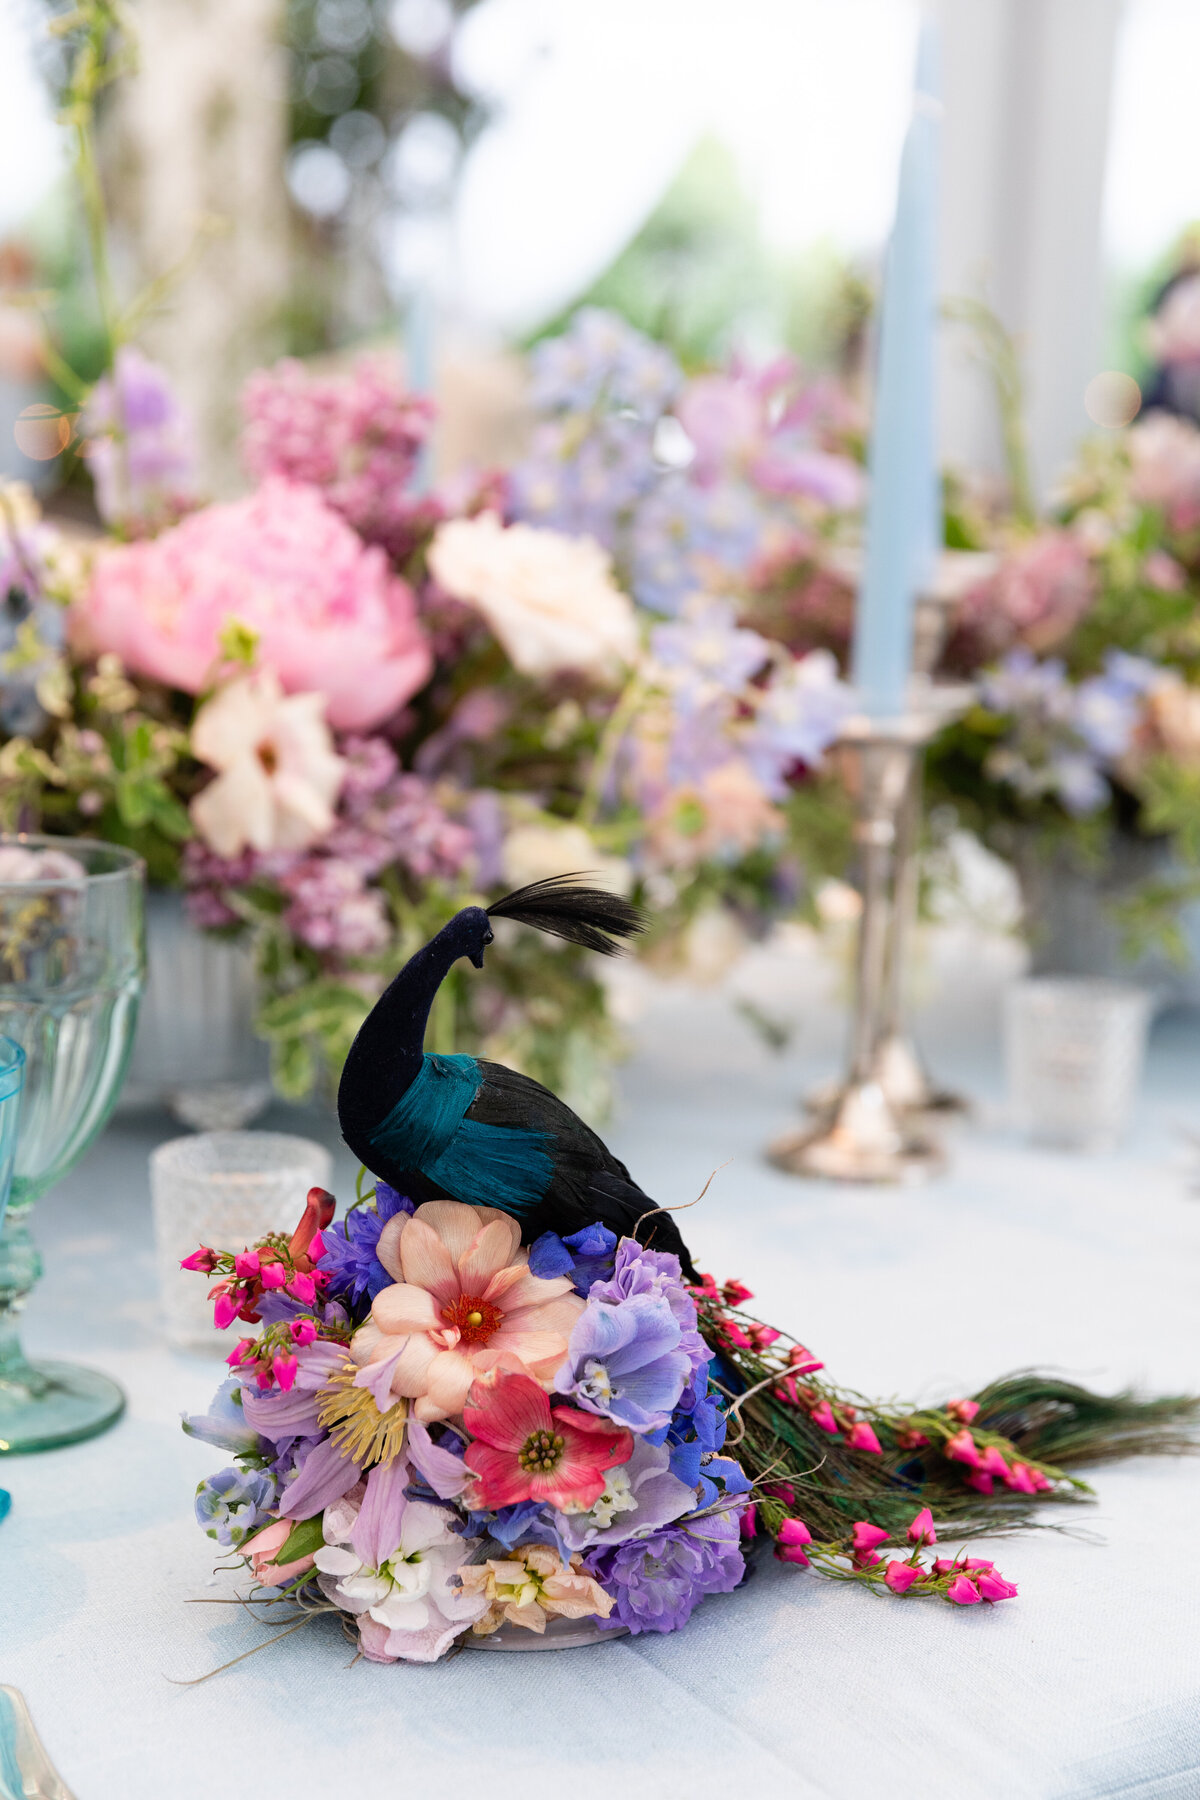 Growing, fresh floral centerpieces with a peacock, including blush garden roses, lilac, blue sweet peas, ranunculus, lavender delphinium, globe allium, and natural greenery for a tented Bridgerton inspired engagement party at a private home in Nashville, TN.